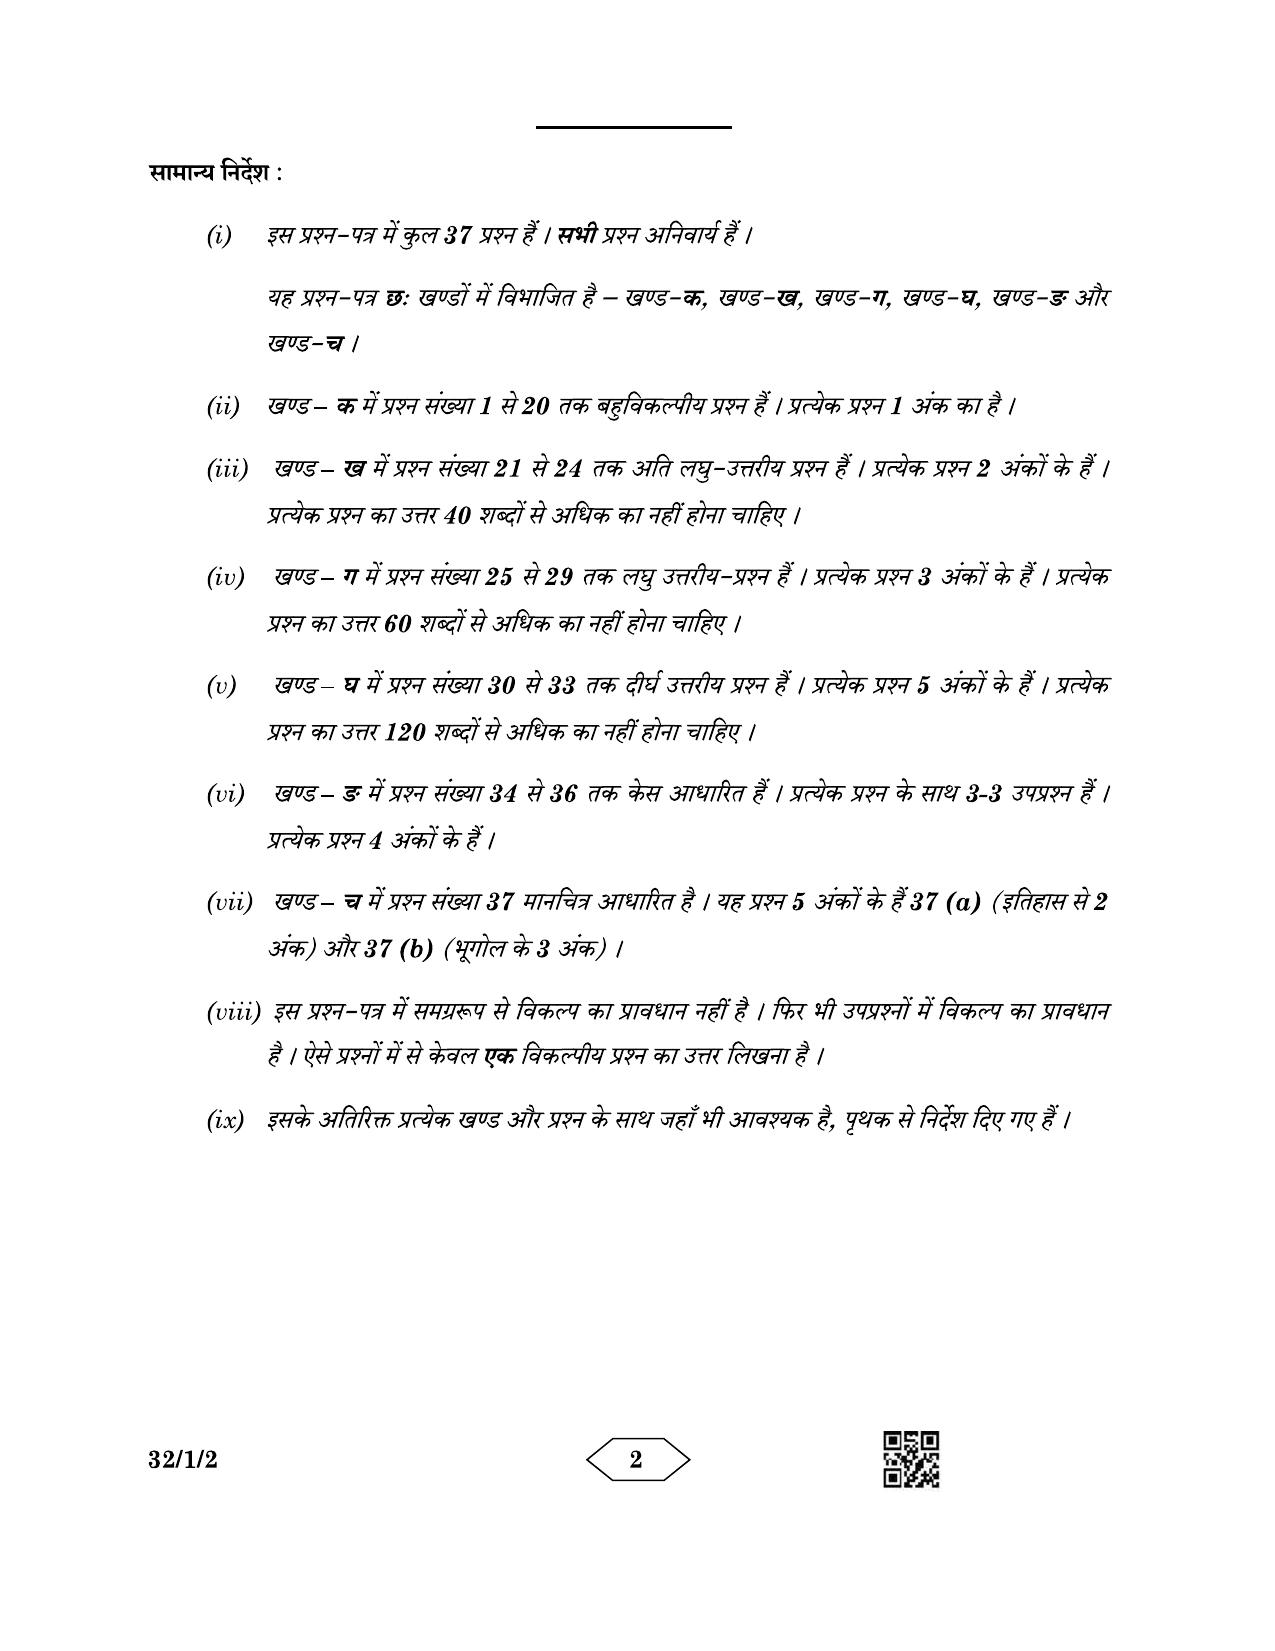 CBSE Class 10 32-1-2 Social Science 2023 Question Paper - Page 2